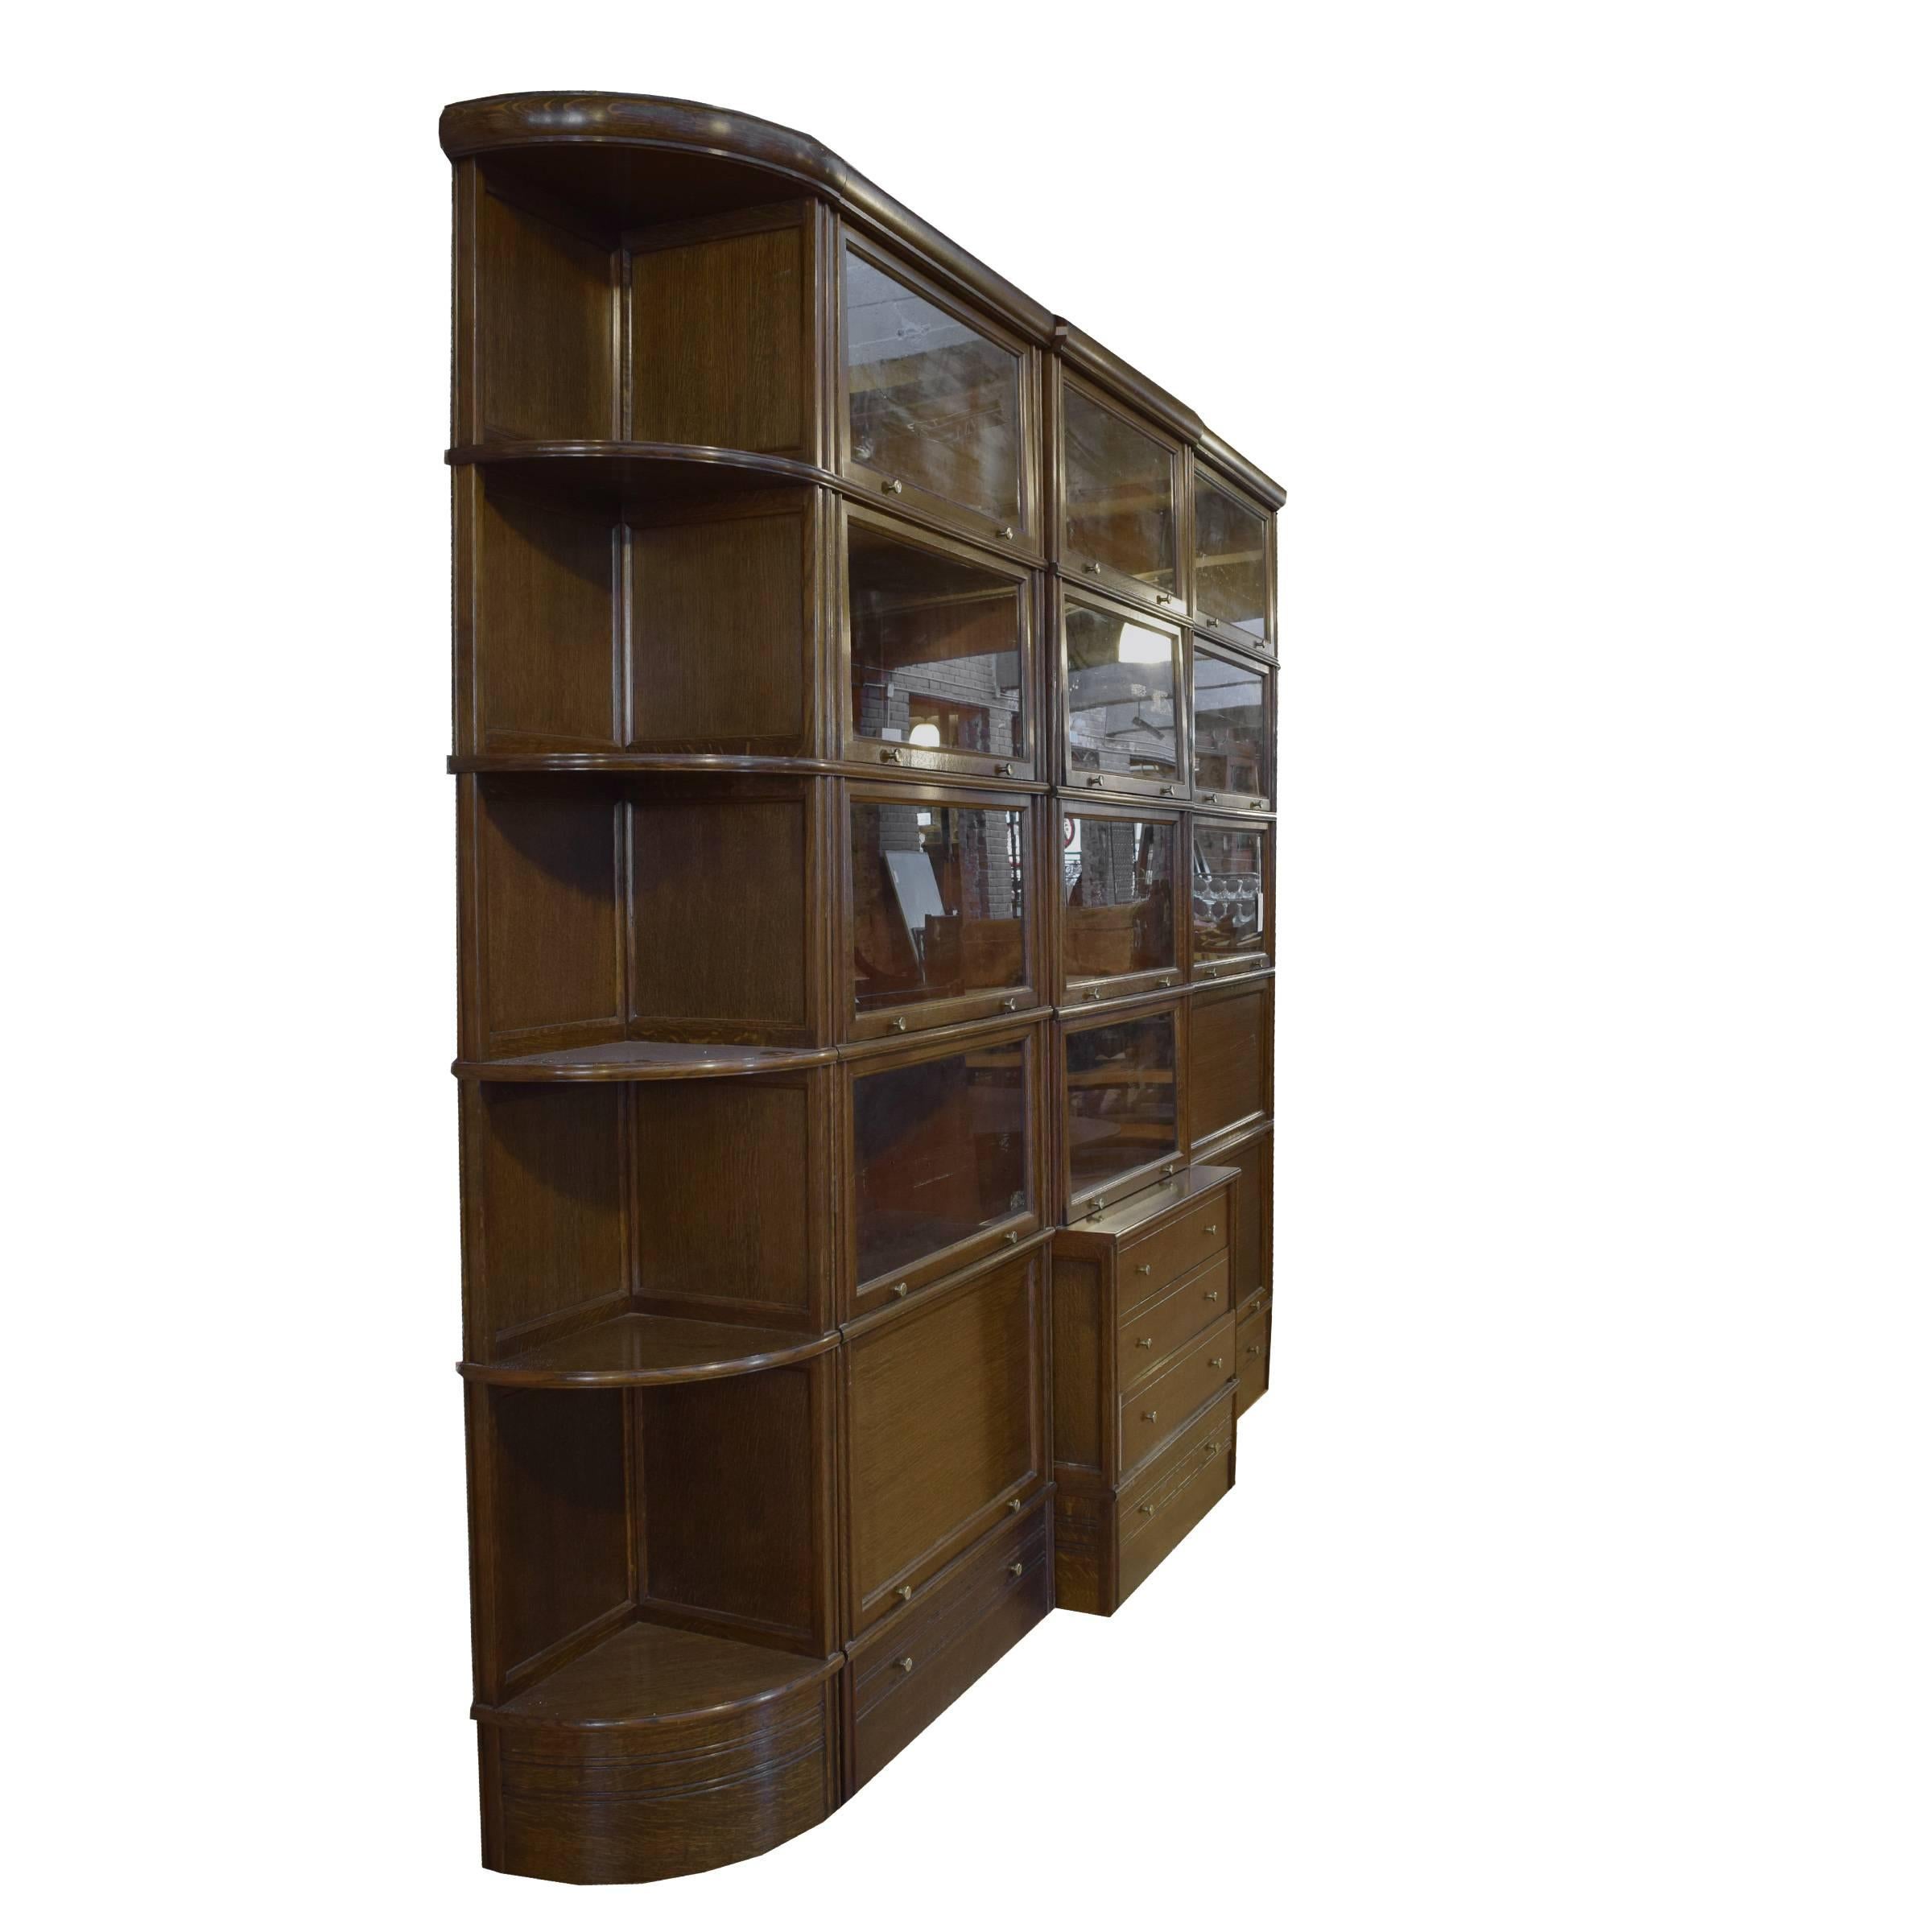 A multi-piece French oak book cabinet with fourteen doors and six-drawer with brass hardware and five shelves. The far right wood door opens into a desk.